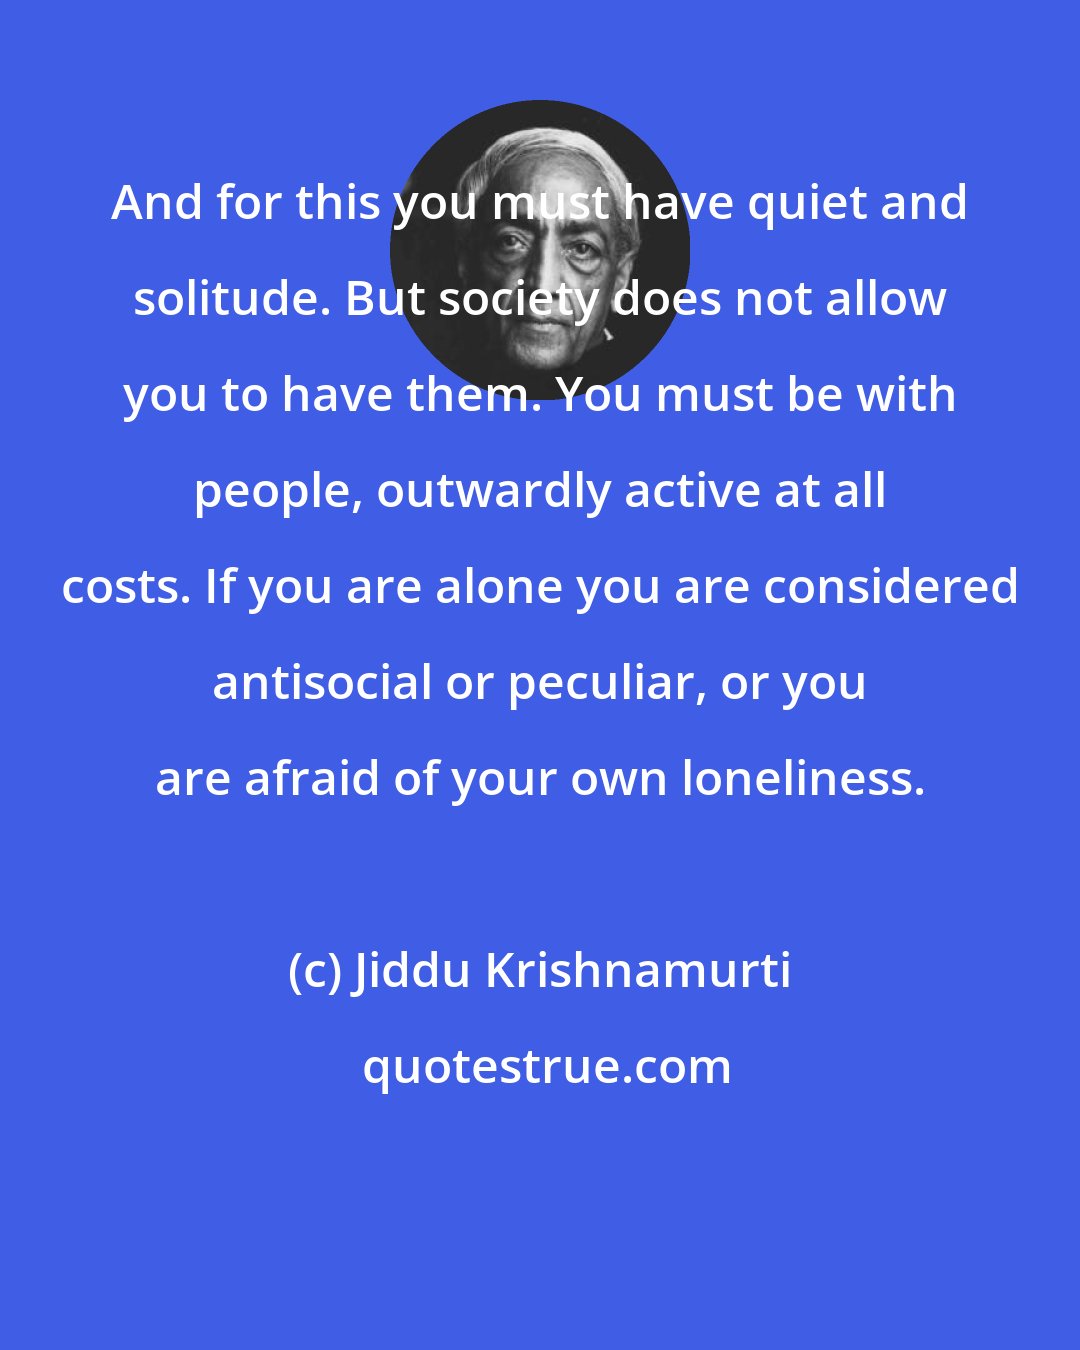 Jiddu Krishnamurti: And for this you must have quiet and solitude. But society does not allow you to have them. You must be with people, outwardly active at all costs. If you are alone you are considered antisocial or peculiar, or you are afraid of your own loneliness.